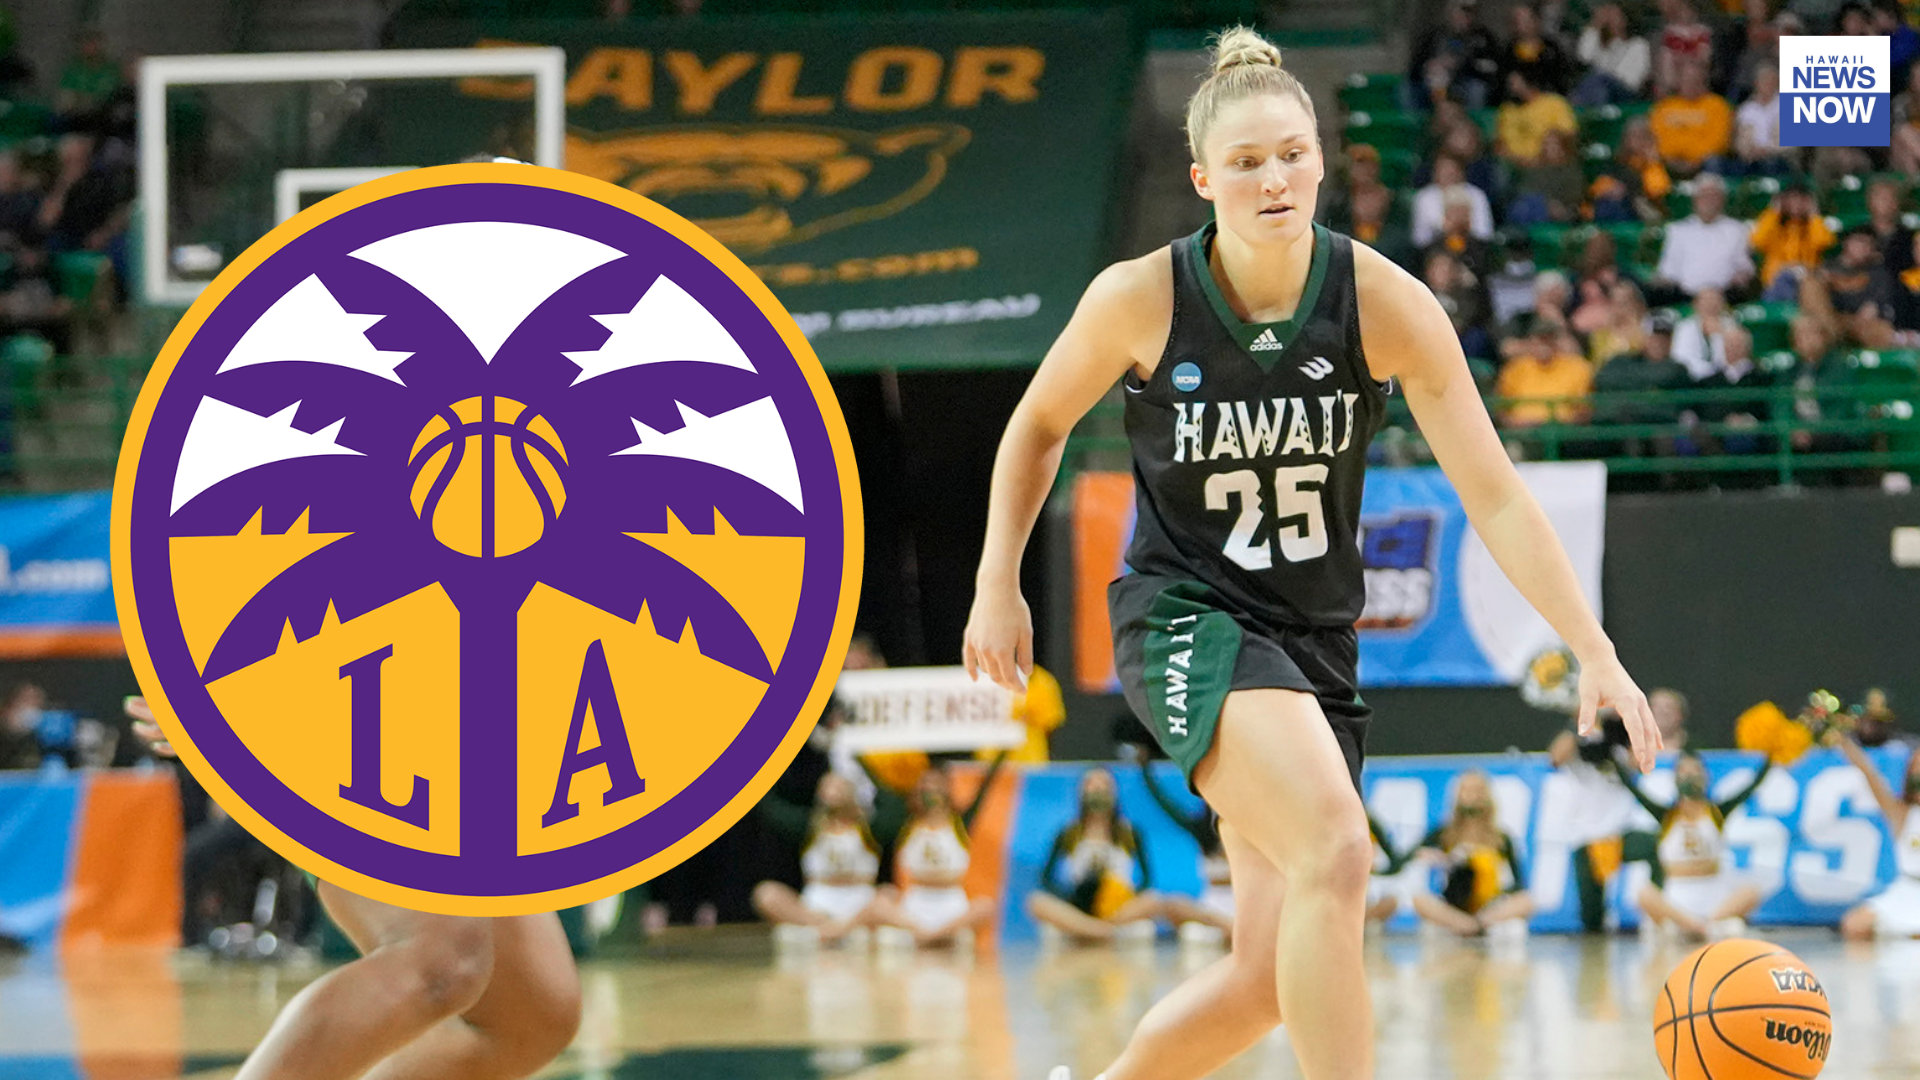 Atwell earns starting spot for WNBA's Sparks